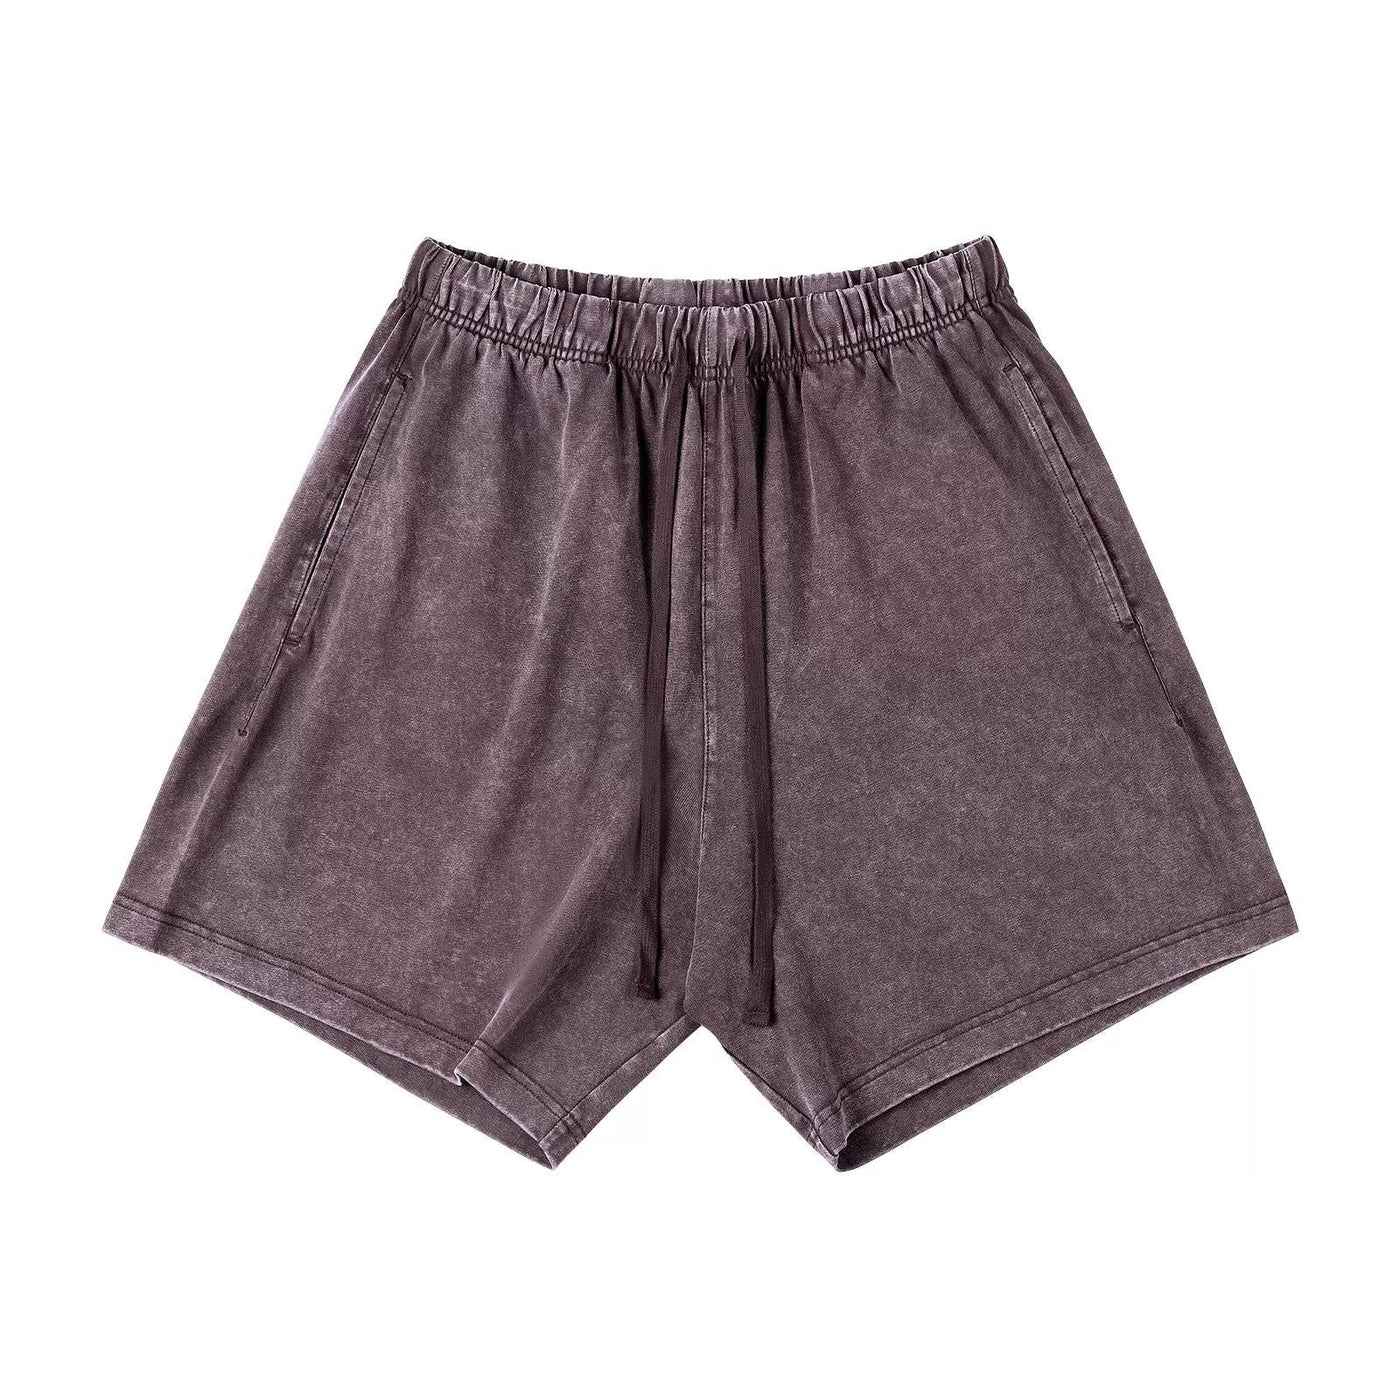 Gartered and Washed Shorts Korean Street Fashion Shorts By IDLT Shop Online at OH Vault